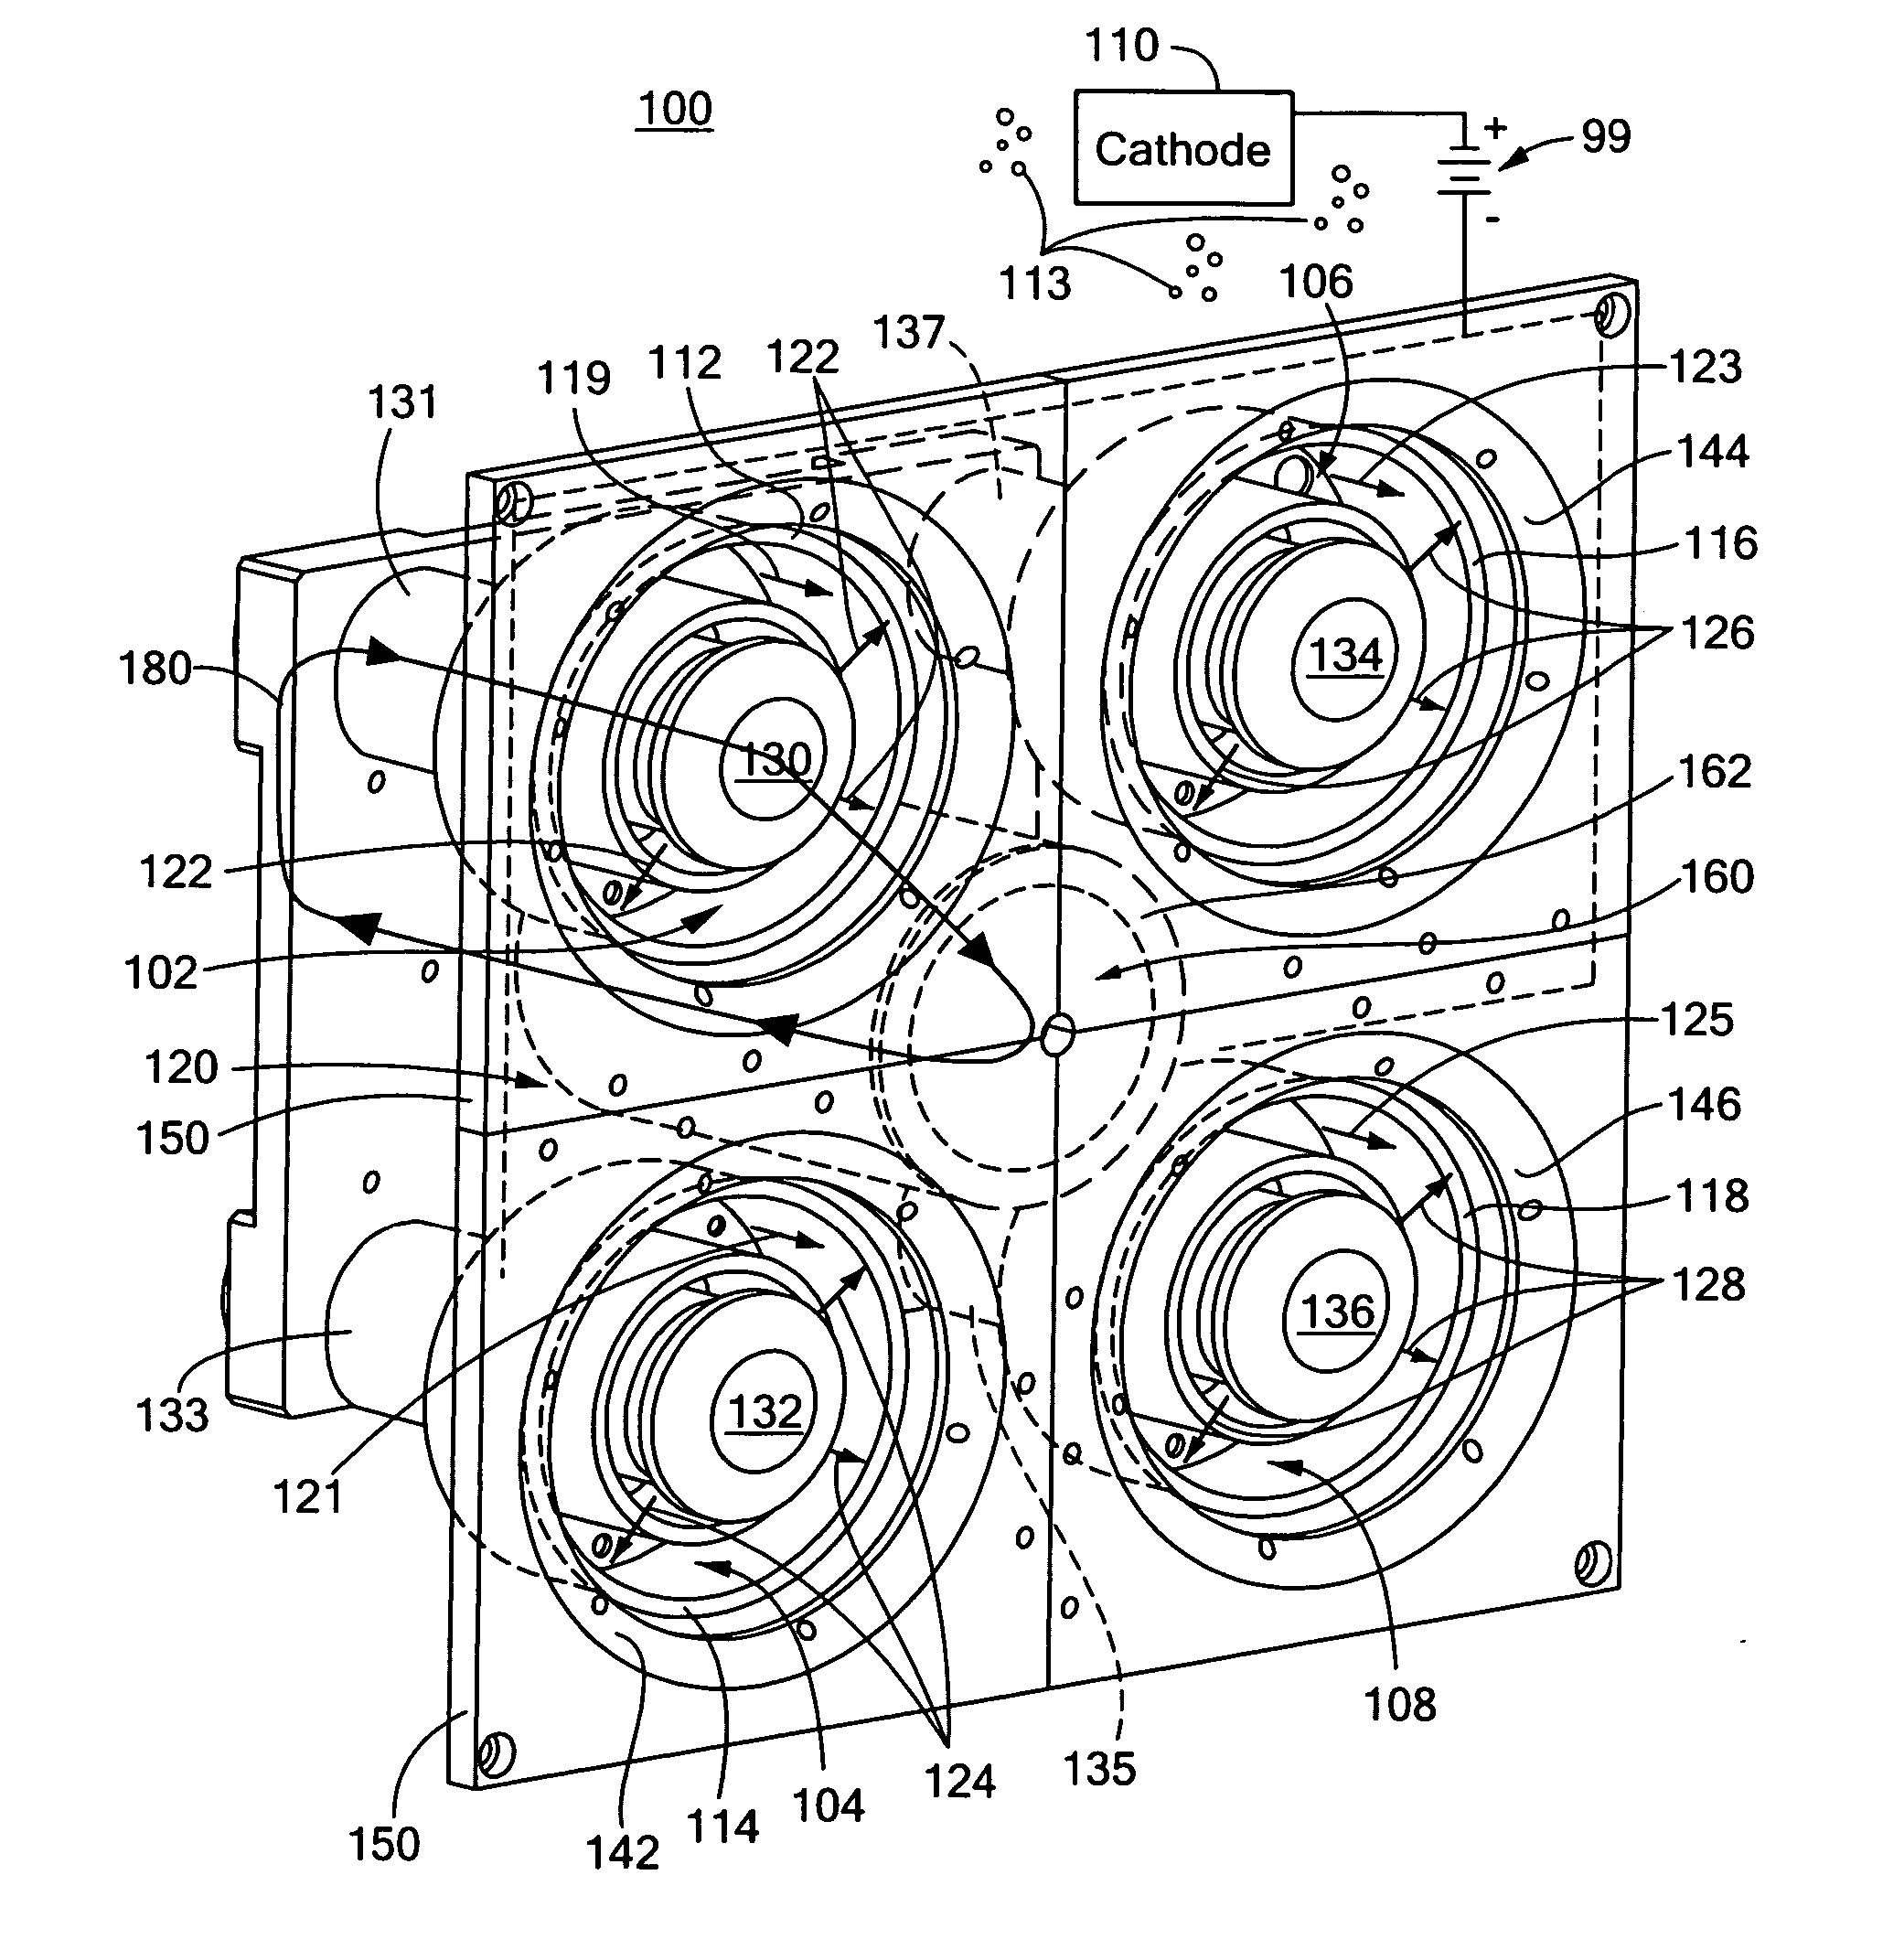 Hall thruster with shared magnetic structure